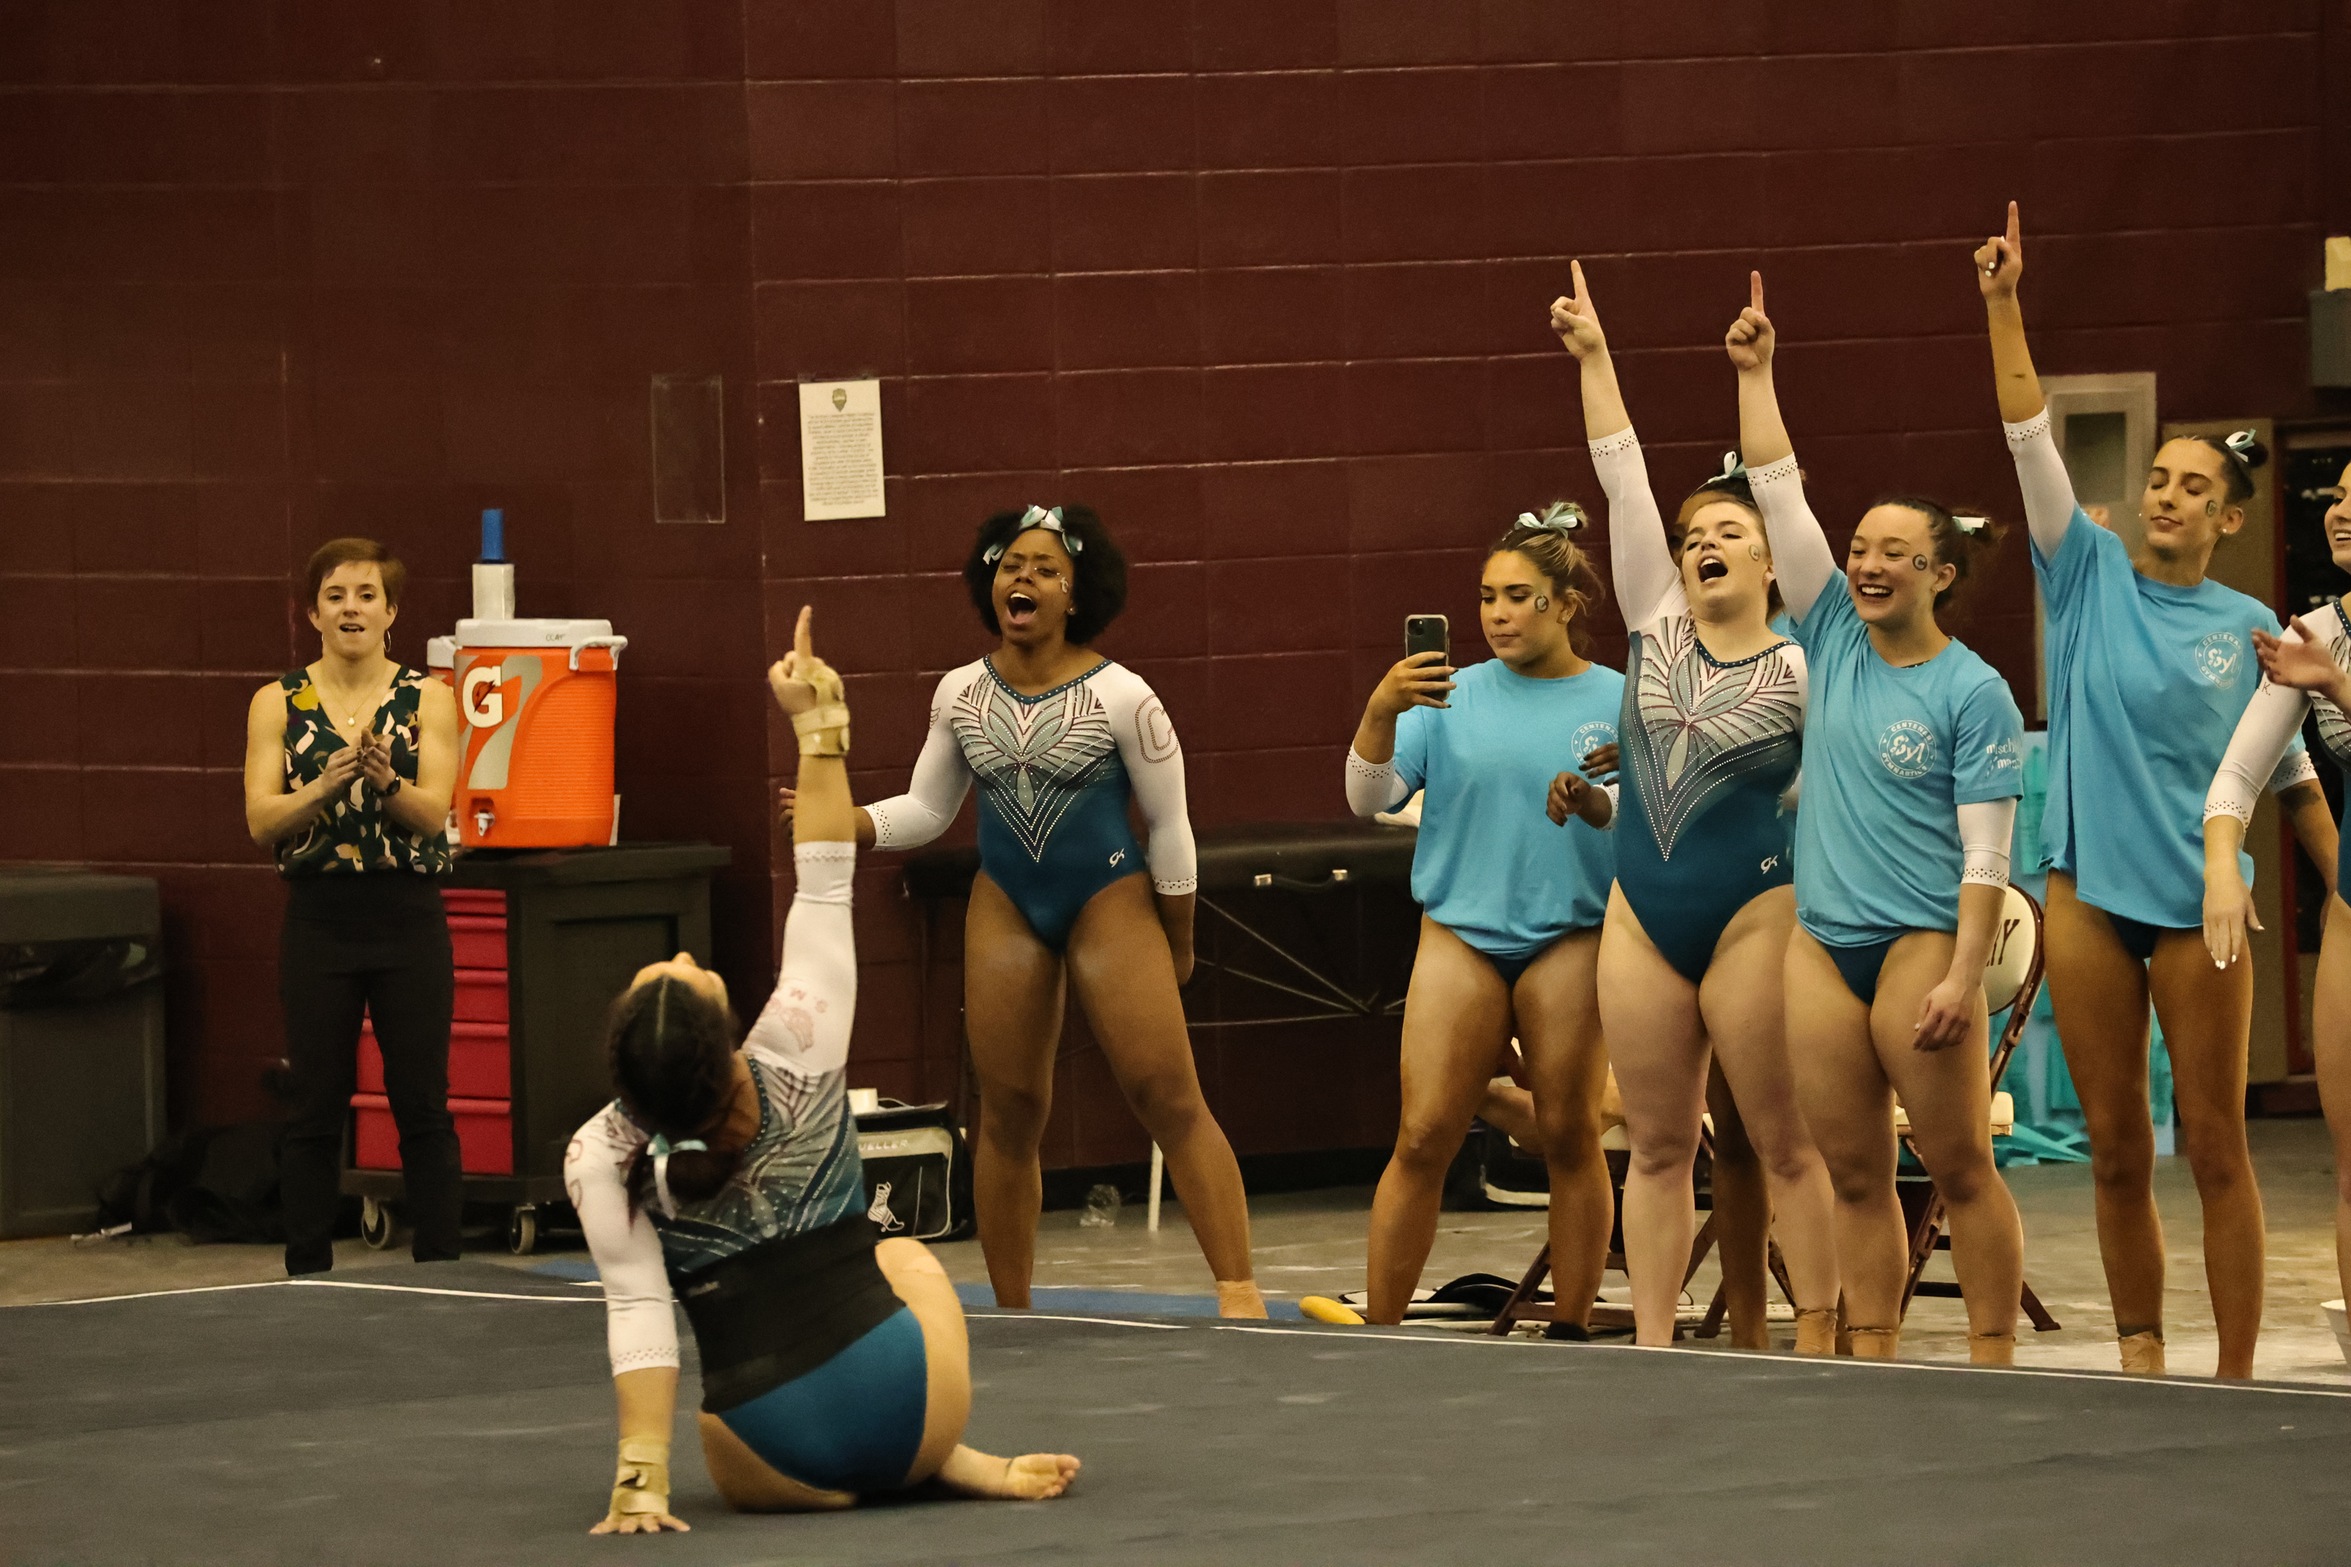 The Ladies earned a season-high 189.150 on Friday.